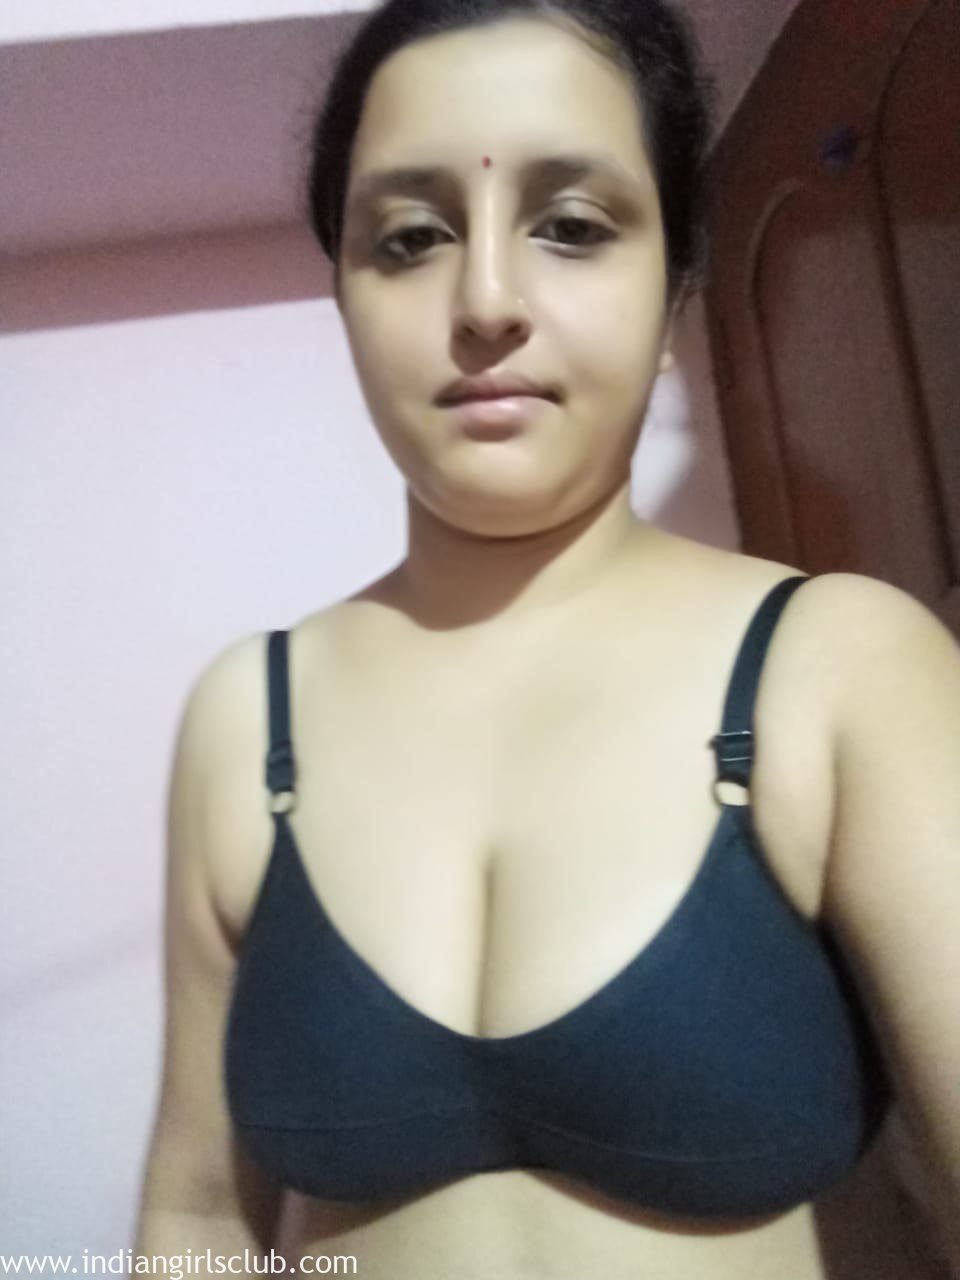 big-tits-bengali-indian-housewife-ready-for-hot-sex-12 - Indian Girls Club 